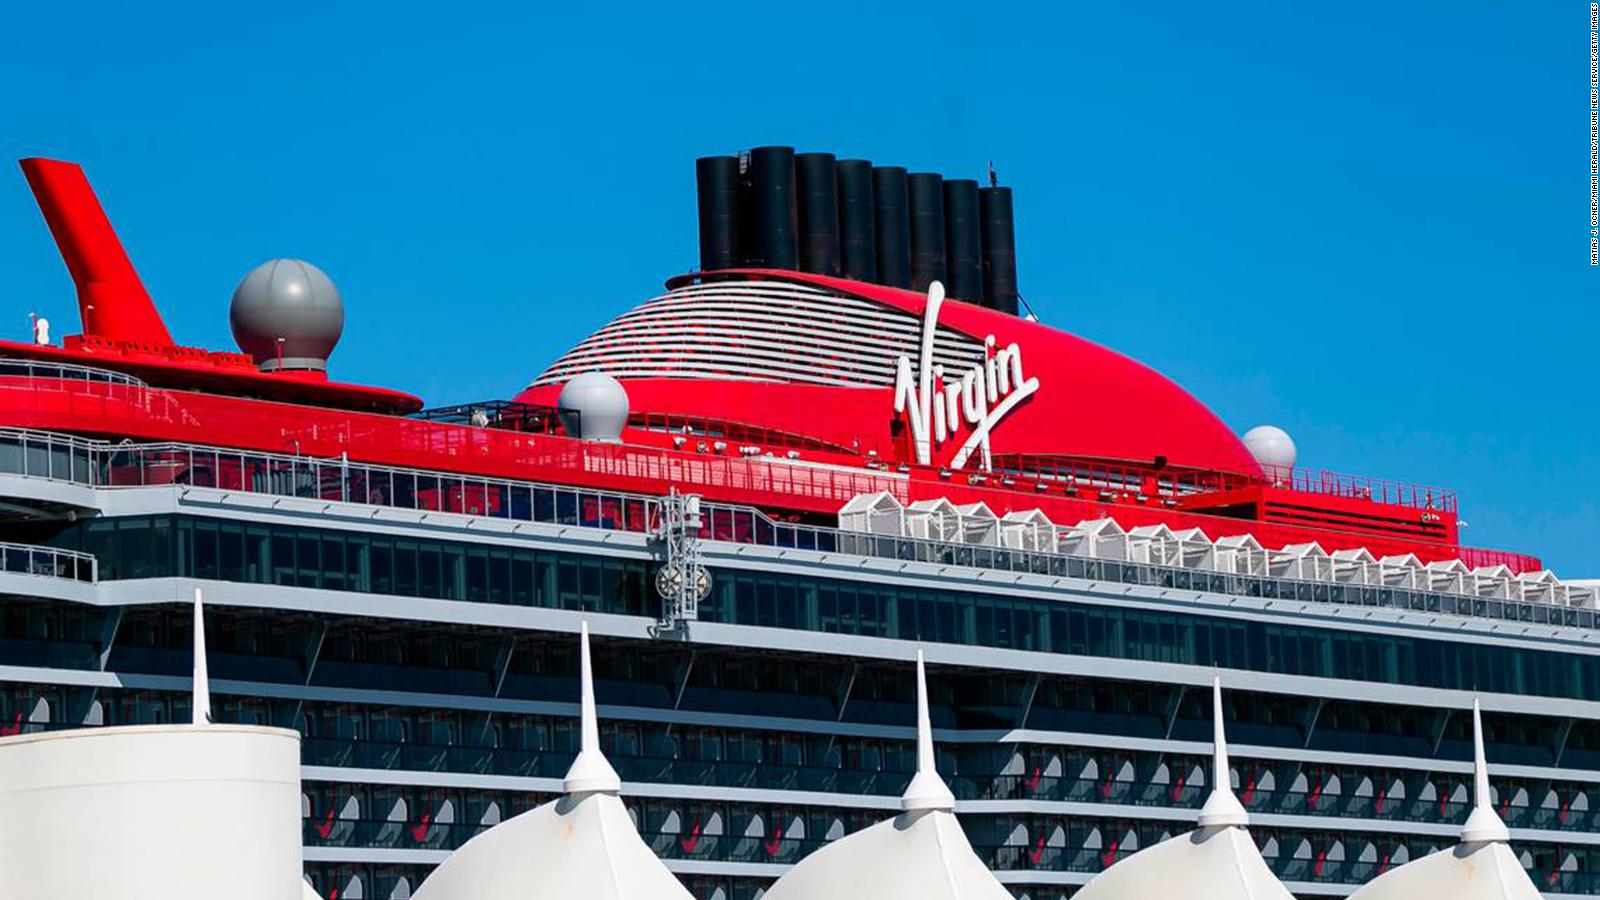 Virgin Voyages cancels launch of Resilient Lady ship | CNN Travel